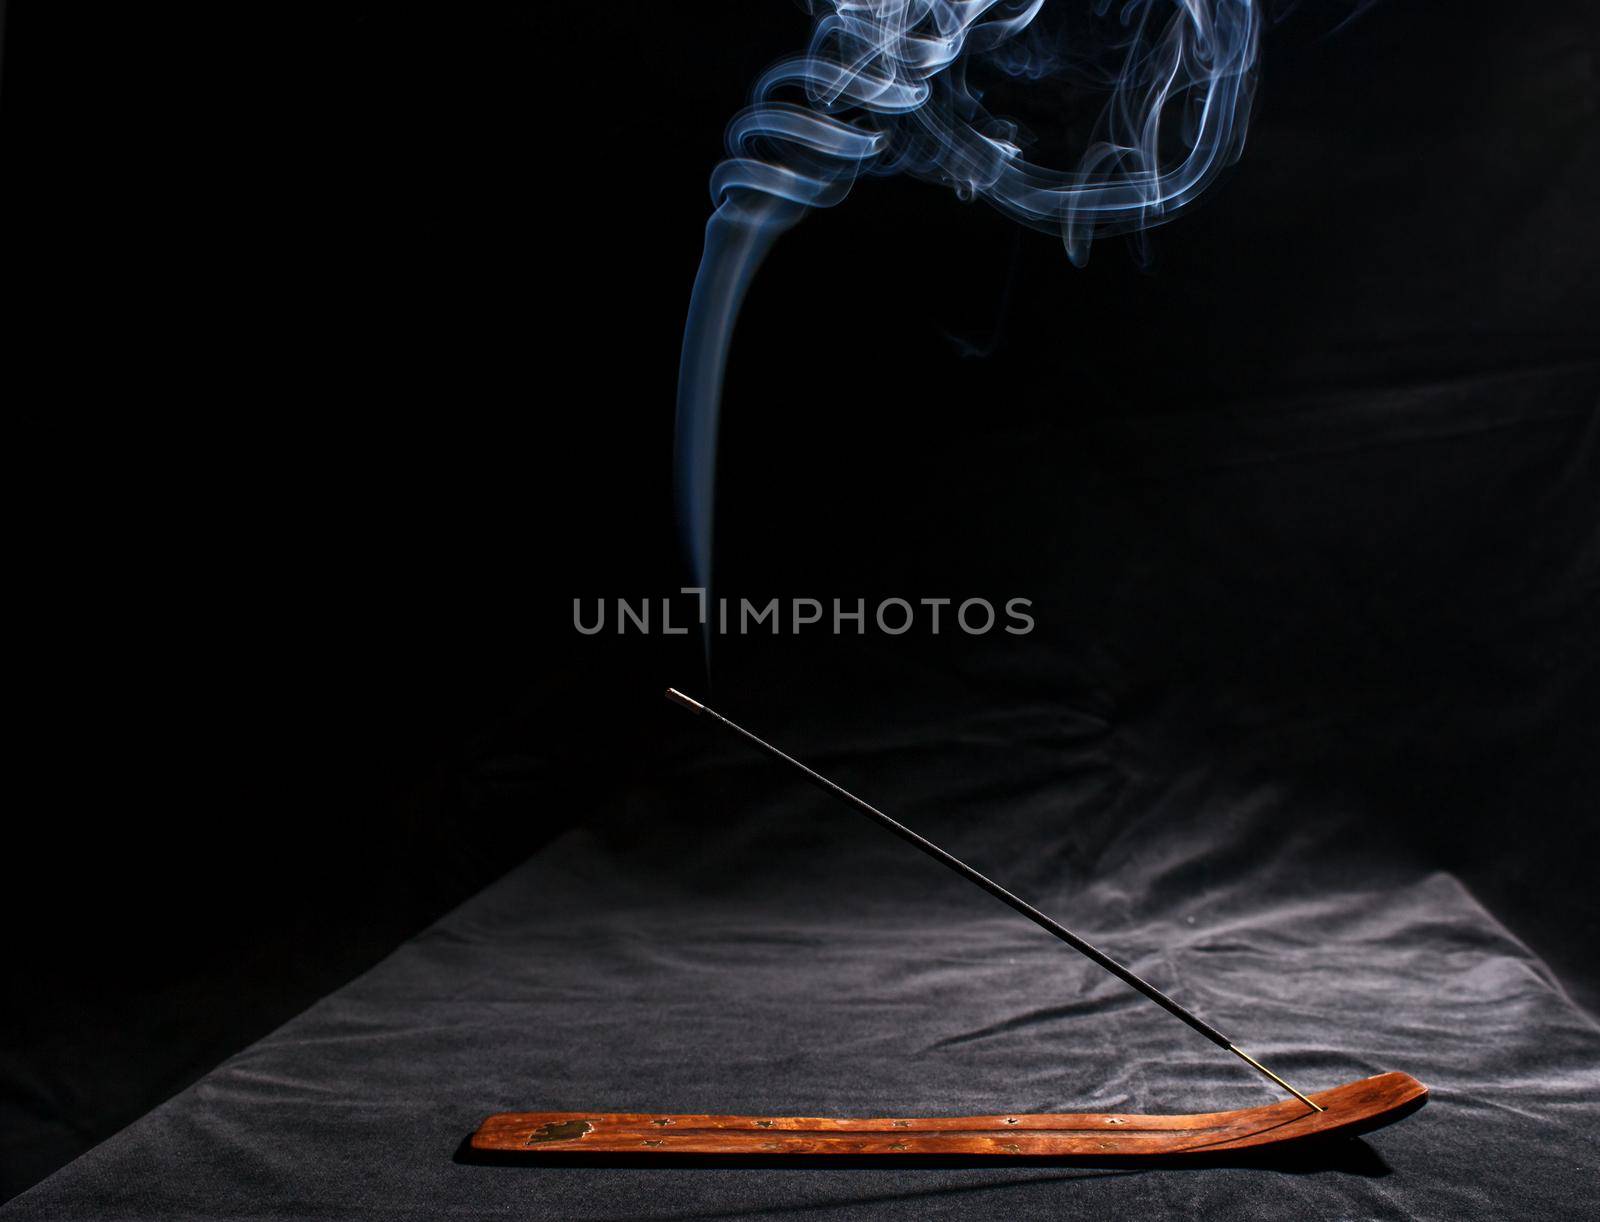 indian incense stick with smoke on black background indoor closeup